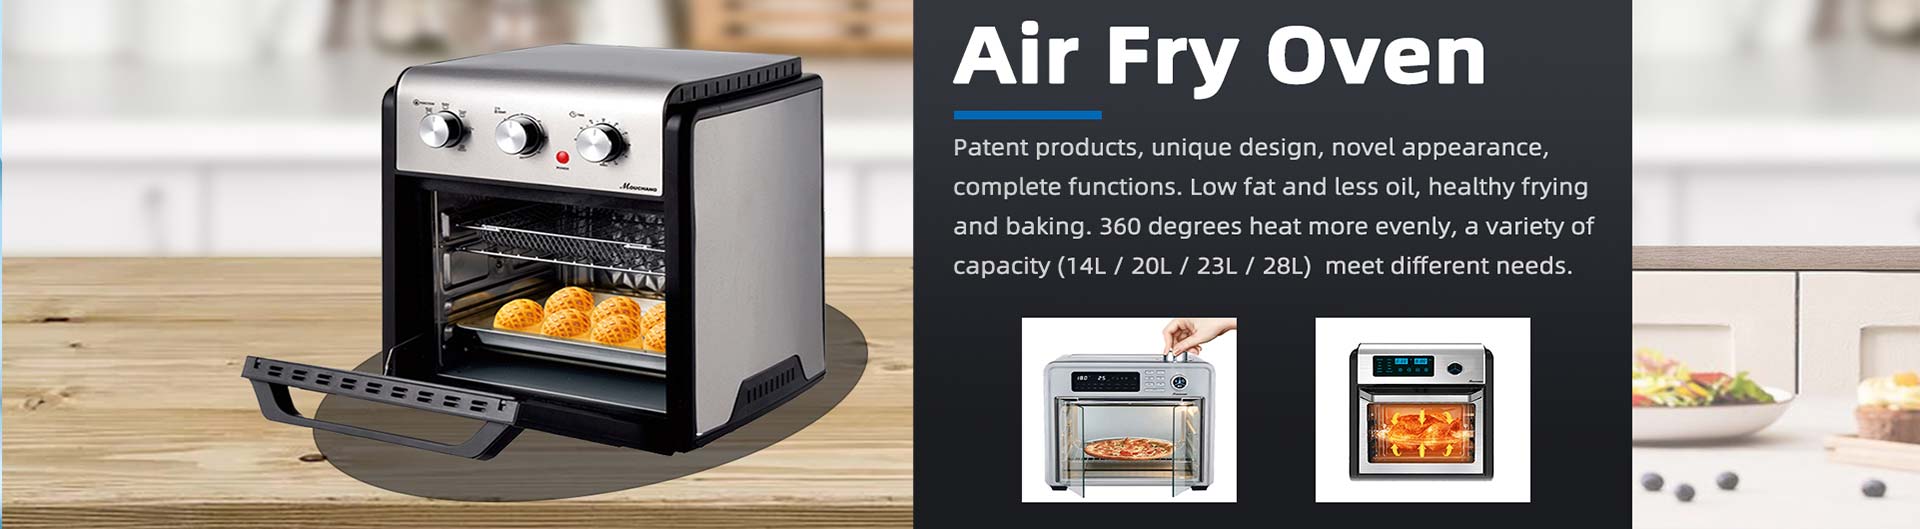 Air Fry Oven